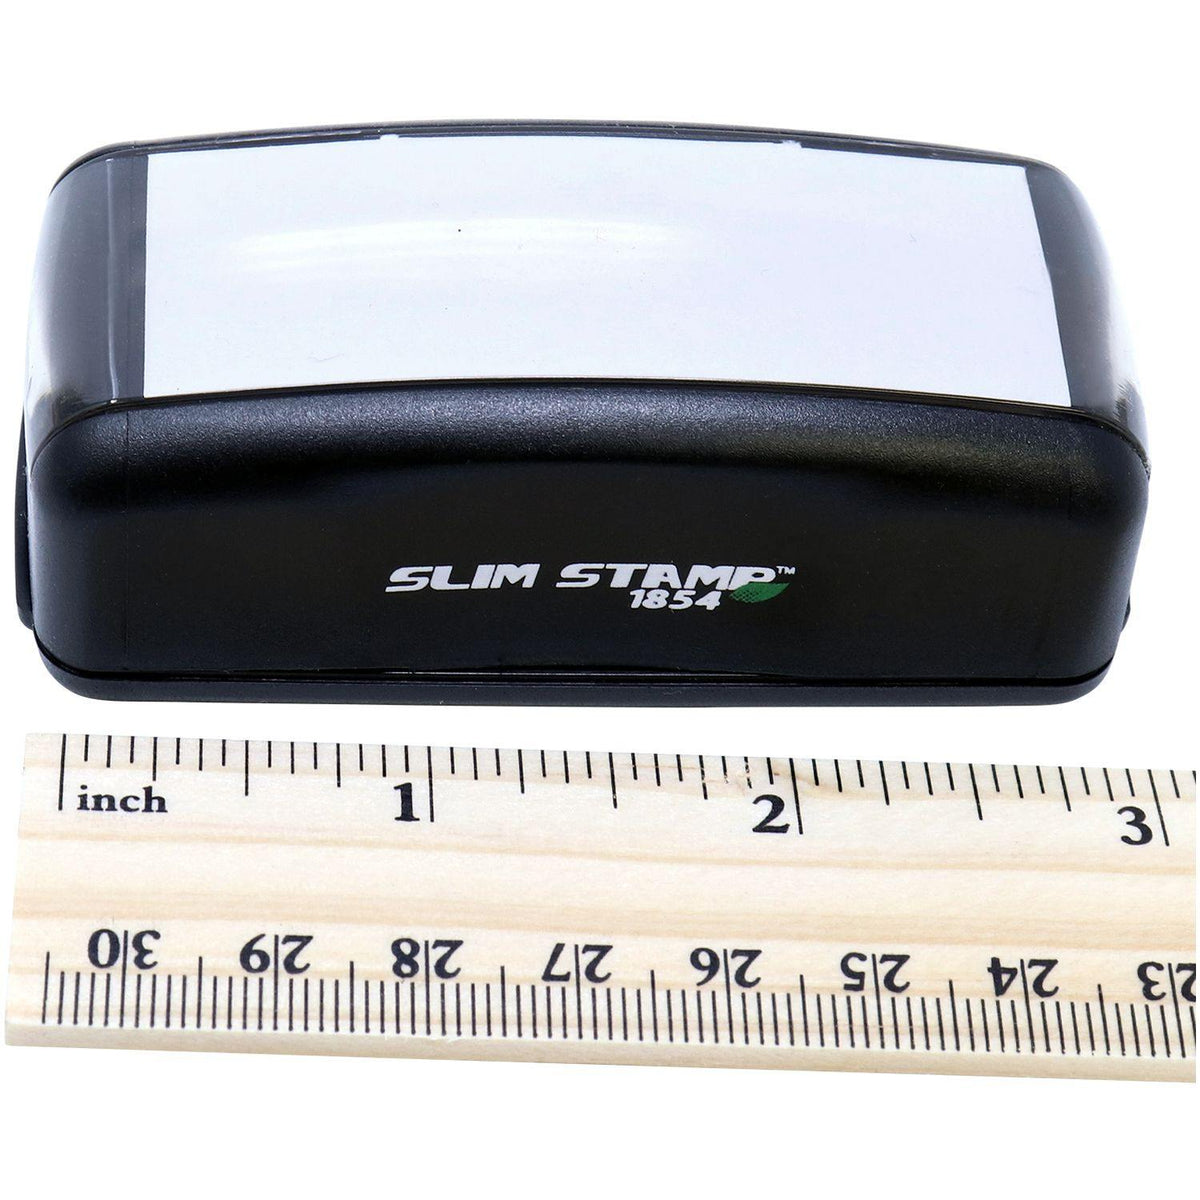 Measurement Large Pre-Inked Insurance Verified Stamp with Ruler